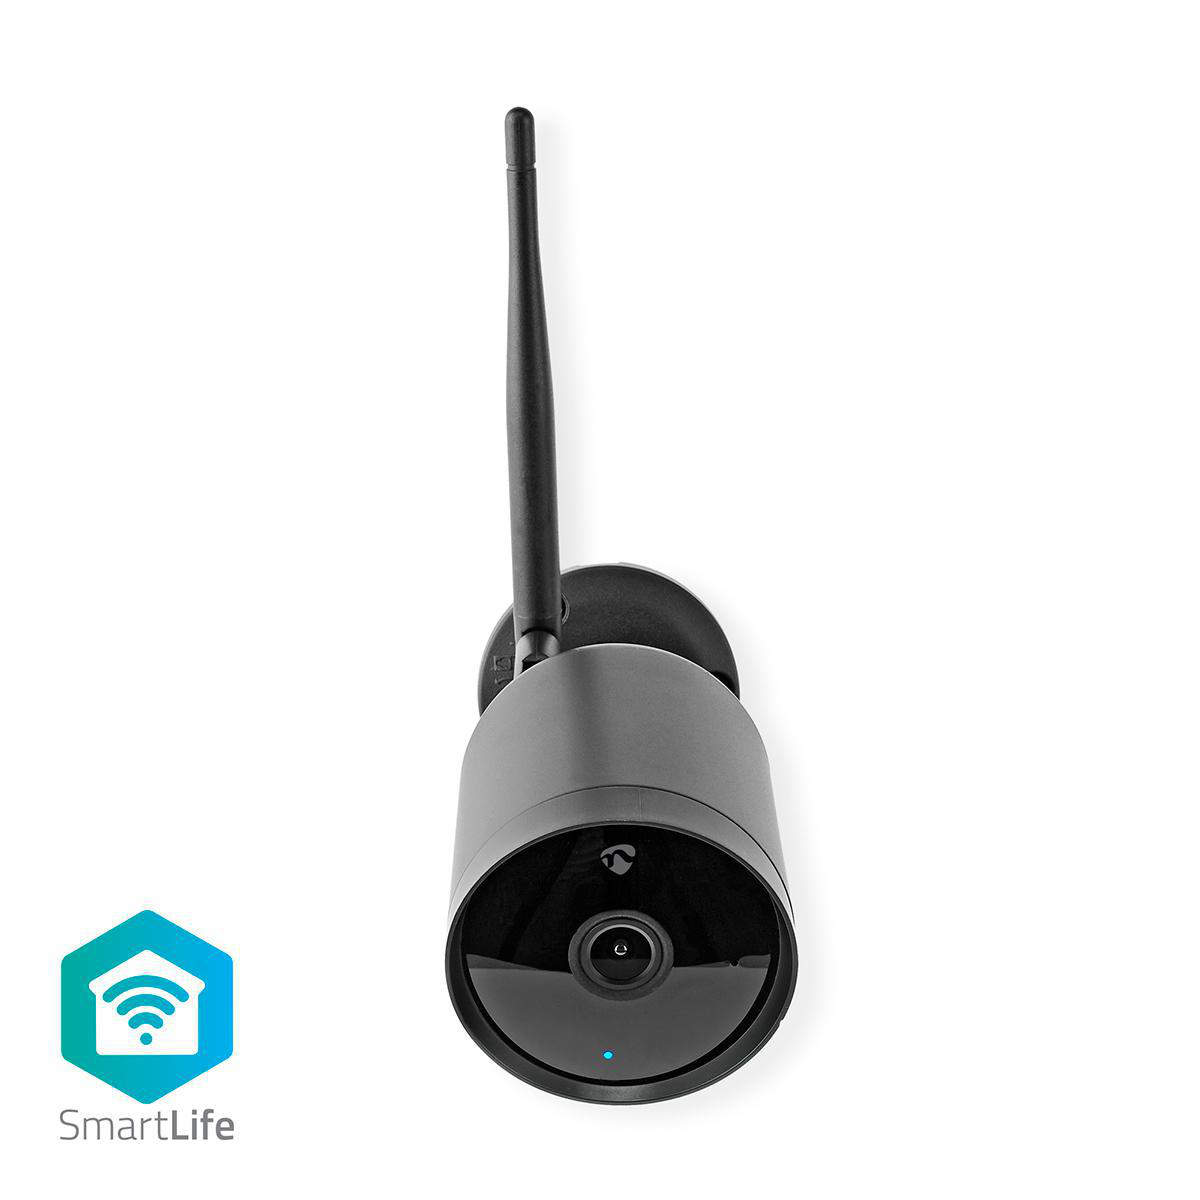 How to install... the SmartLife 'WallBullet' Indoor Camera